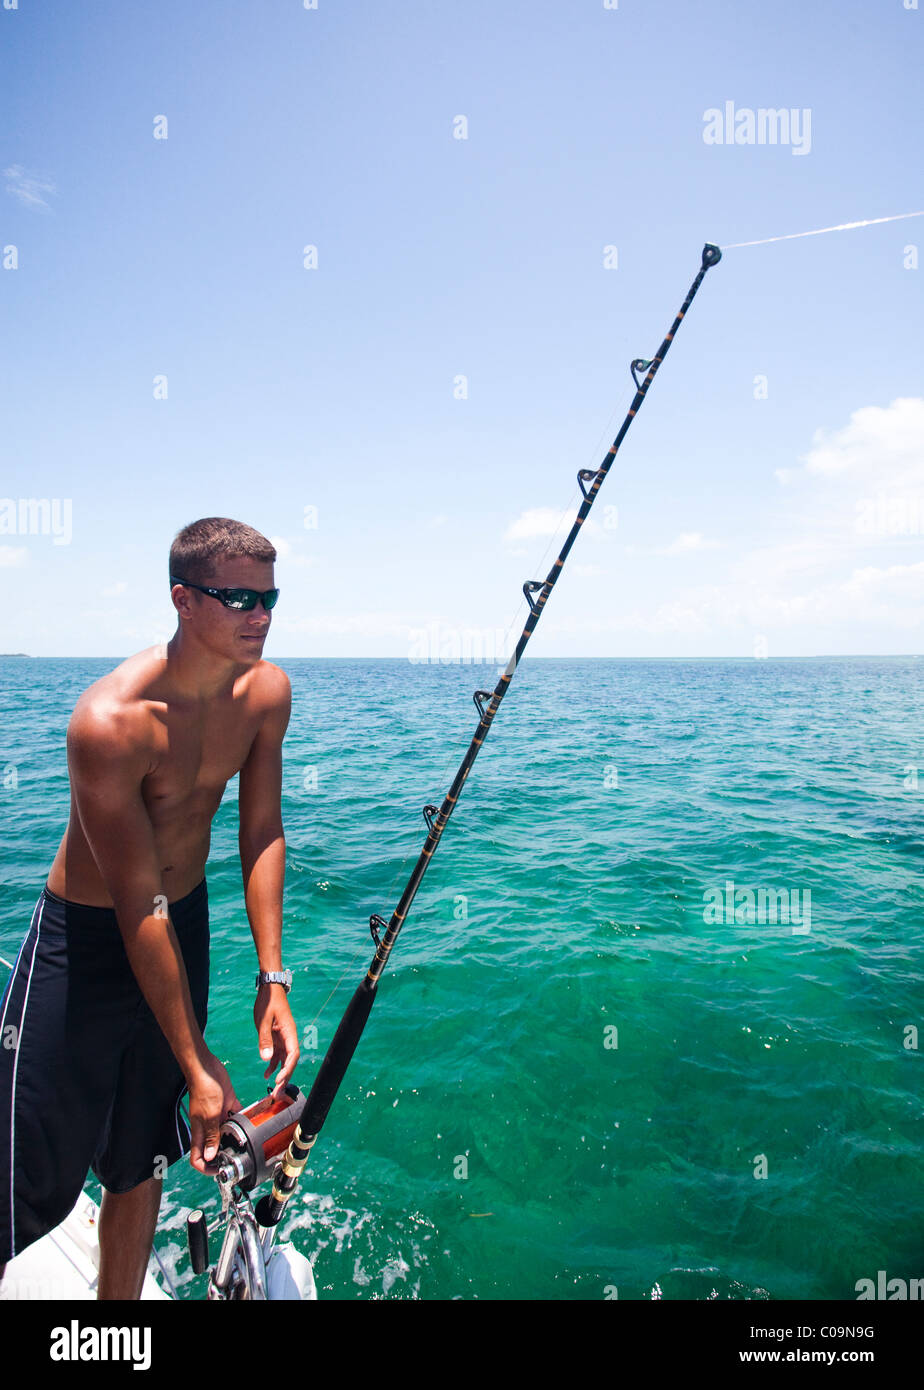 https://c8.alamy.com/comp/C09N9G/a-young-man-lets-fishing-line-out-of-his-reel-while-deep-sea-fishing-C09N9G.jpg